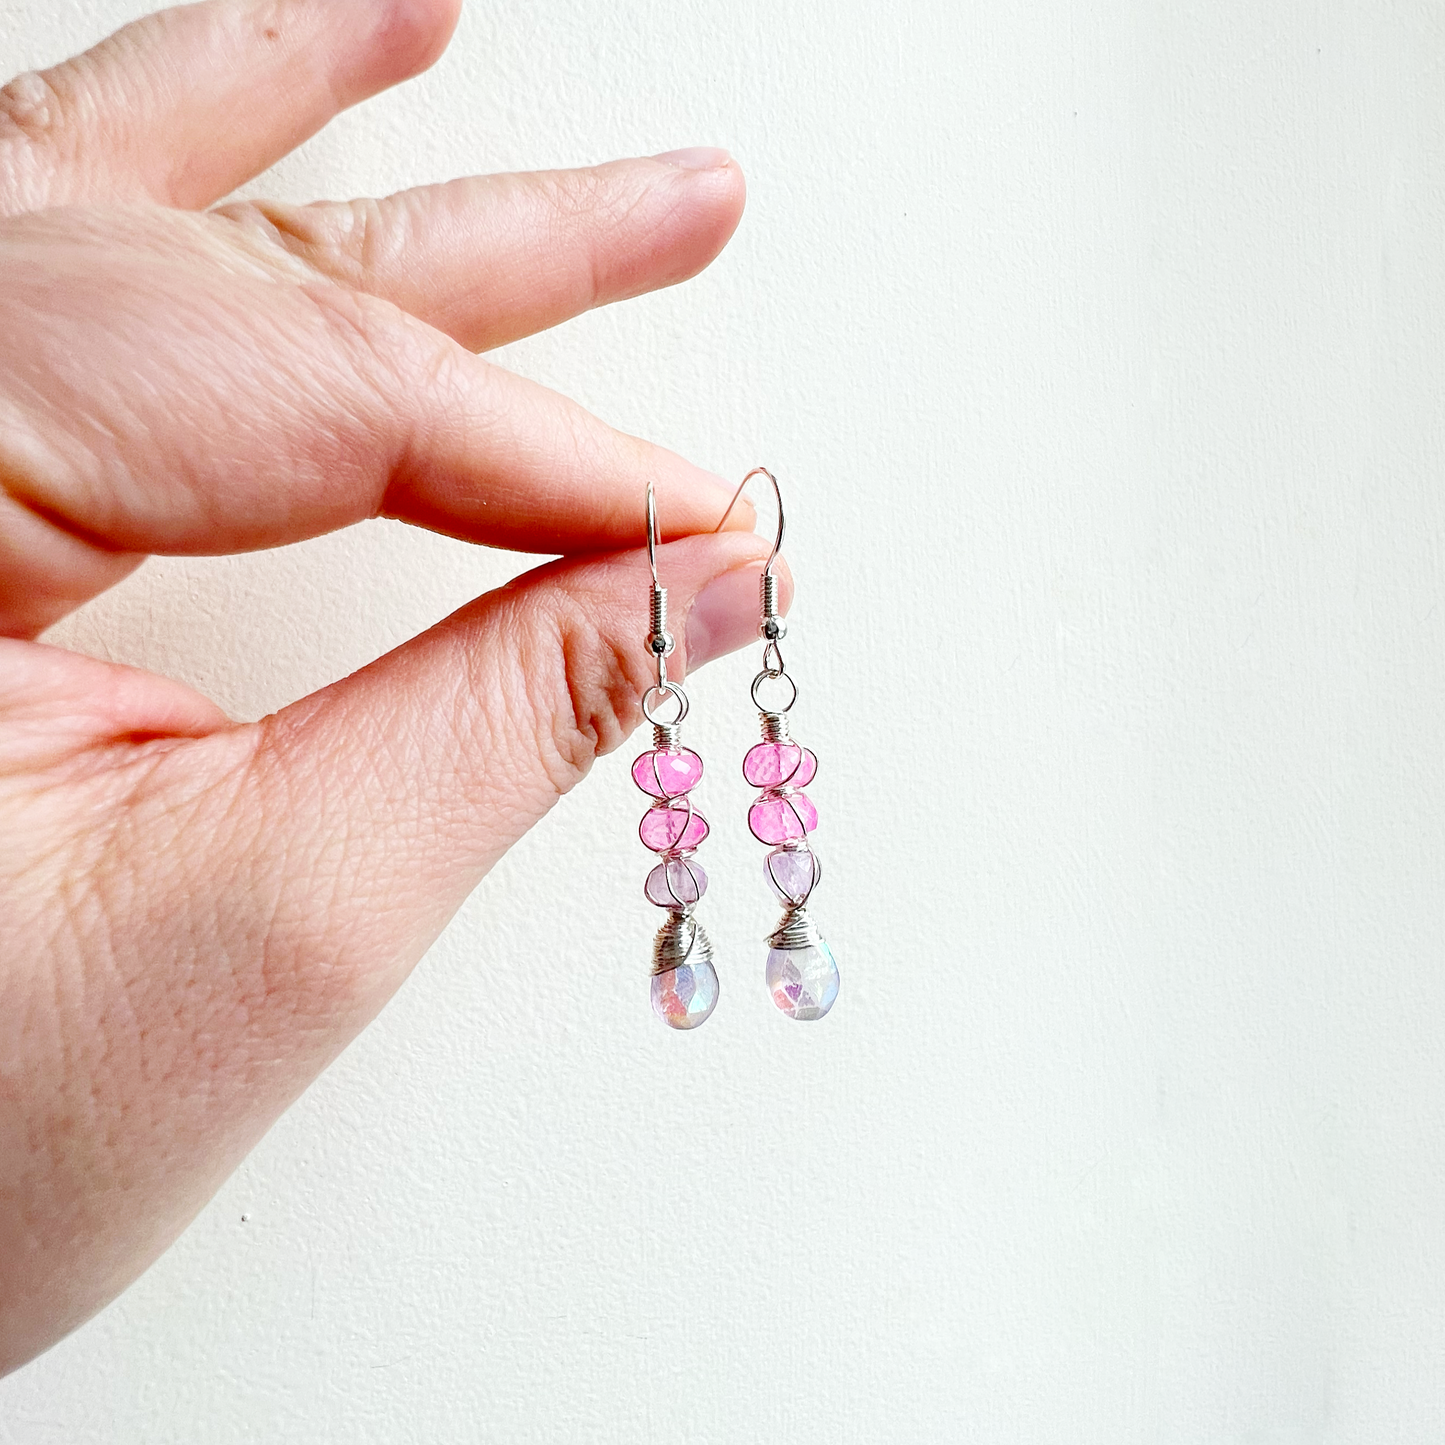 Twisted kisses earrings - Lavender amethyst and Zambian amethyst